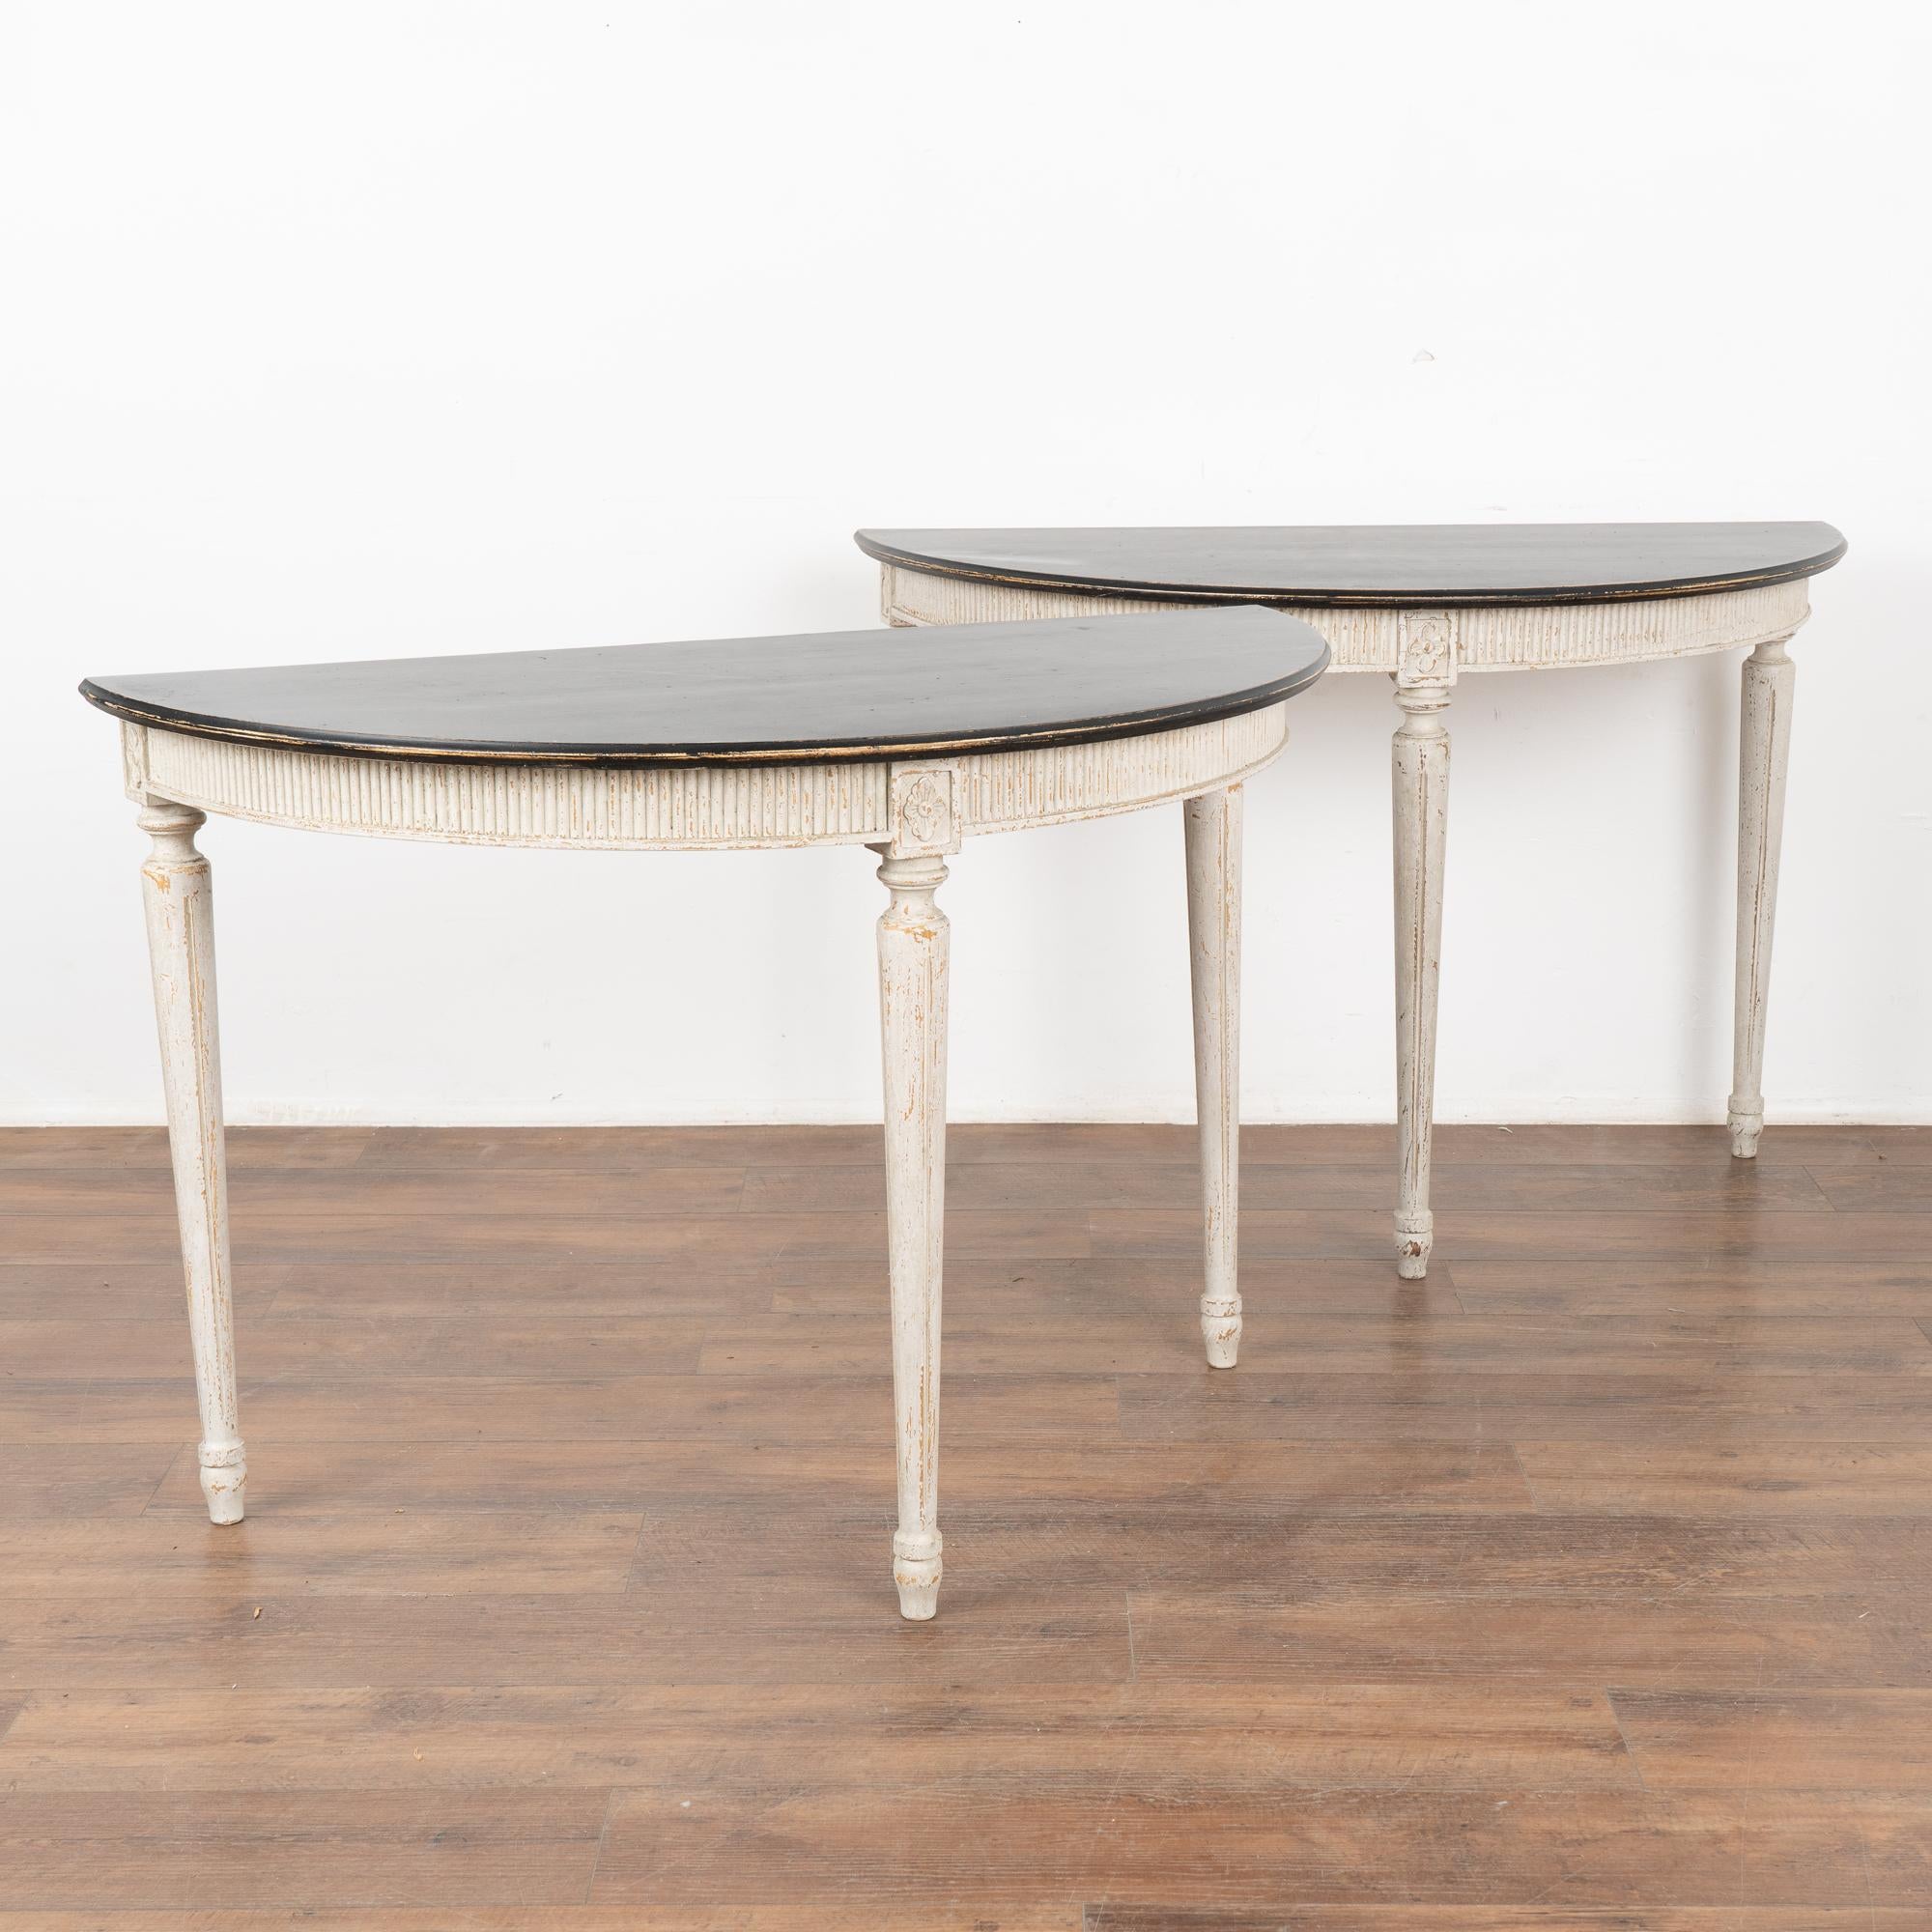 Pair, Gustavian demi-lune pine side tables or consoles with gently tapered fluted legs and decorative fluted carving along skirt.
Newer professionally applied layered antique white painted finish with gray undertones and contrasting black top,